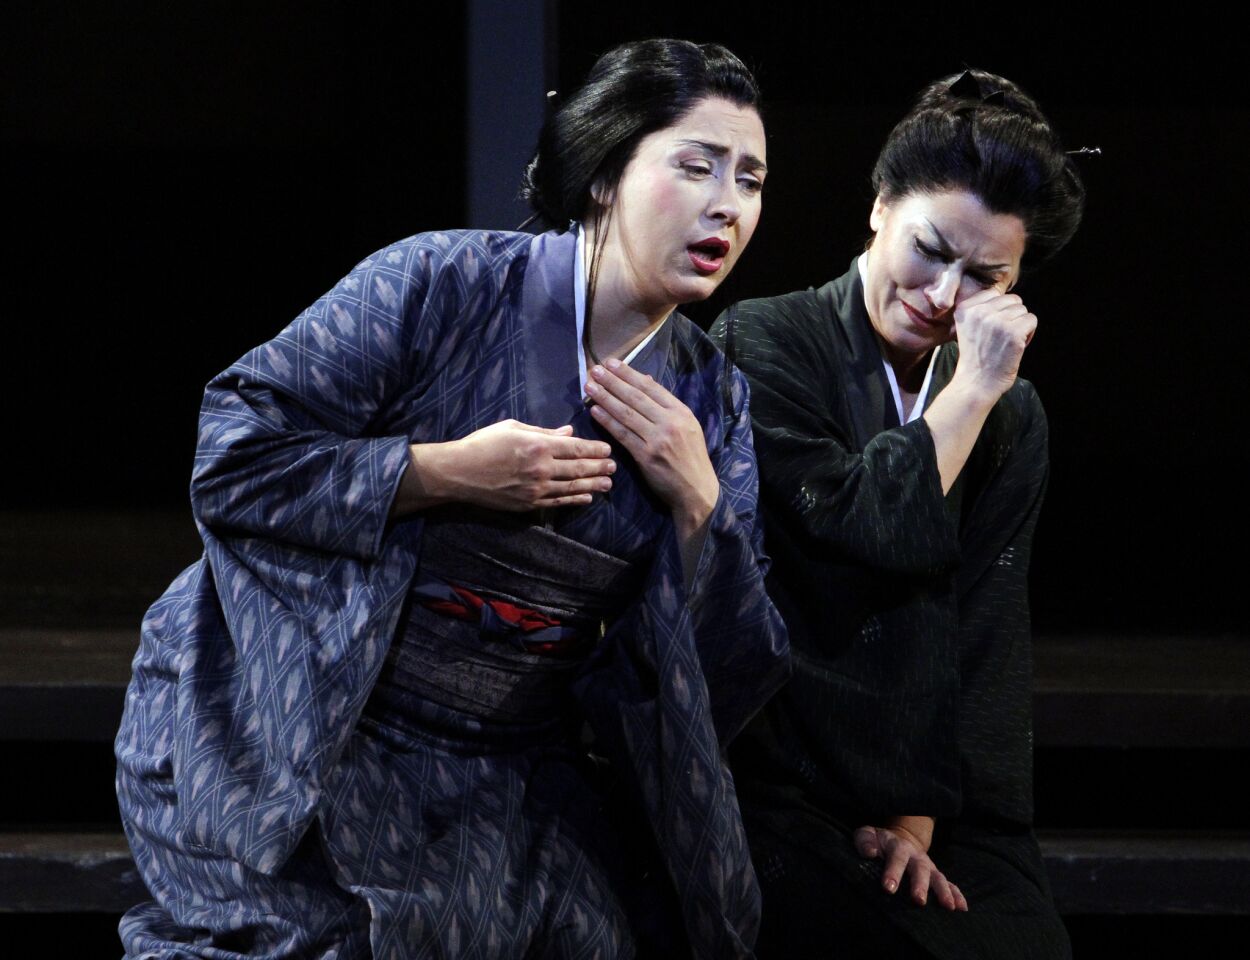 Oksana Dyka (Cio-Cio-San) in the final scene during the dress rehearsal of L.A. Opera's production of Puccini's "Madame Butterfly" at the Dorothy Chandler Pavilion.REVIEW: Some bright spots in a lesser 'Madame Butterfly' | Photos